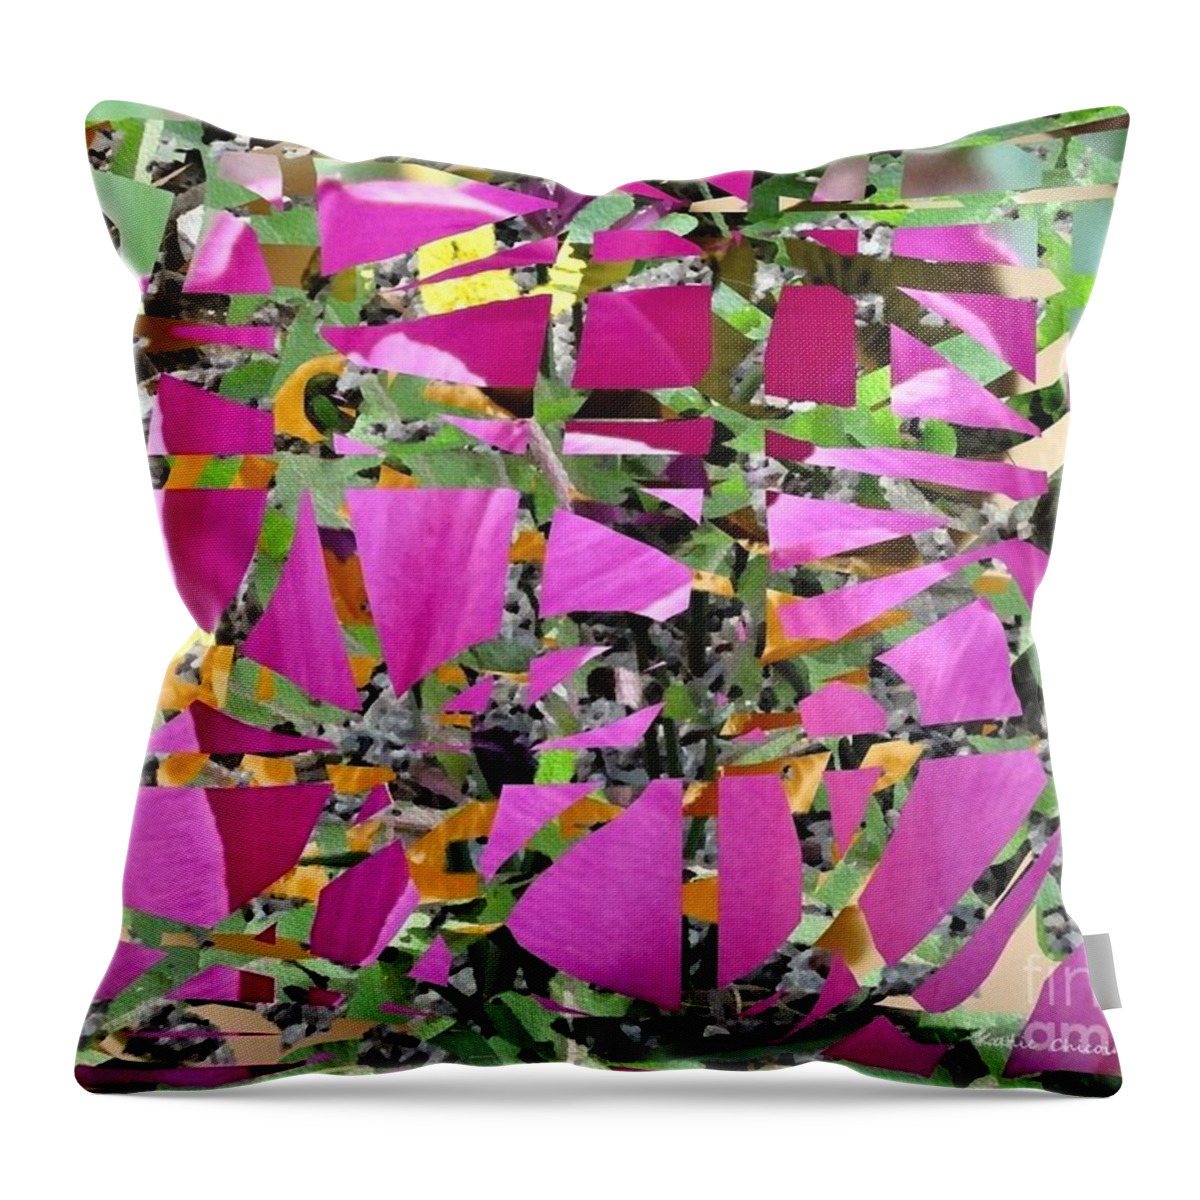 Photographic Art Throw Pillow featuring the photograph Breaking Up is Hard to Do by Kathie Chicoine